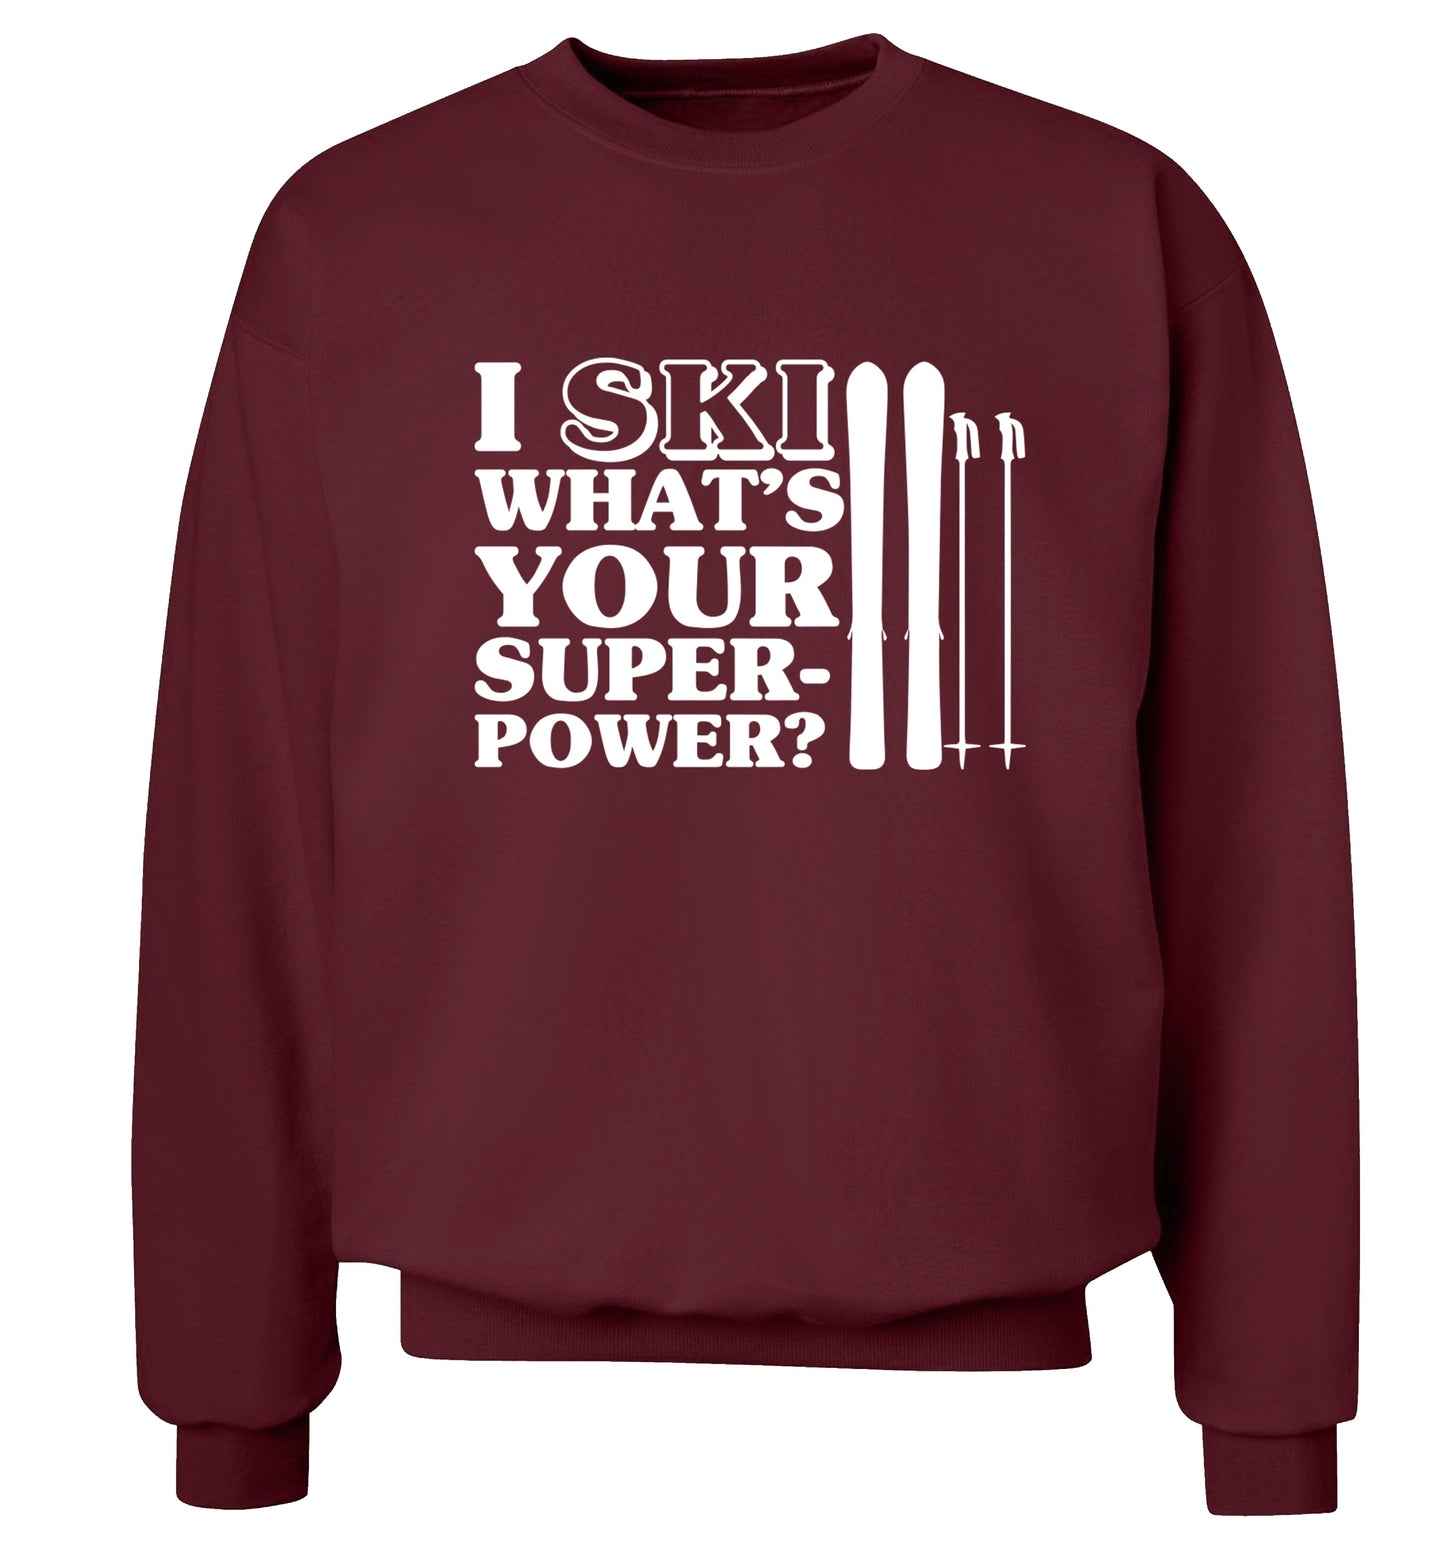 I ski what's your superpower? Adult's unisexmaroon Sweater 2XL